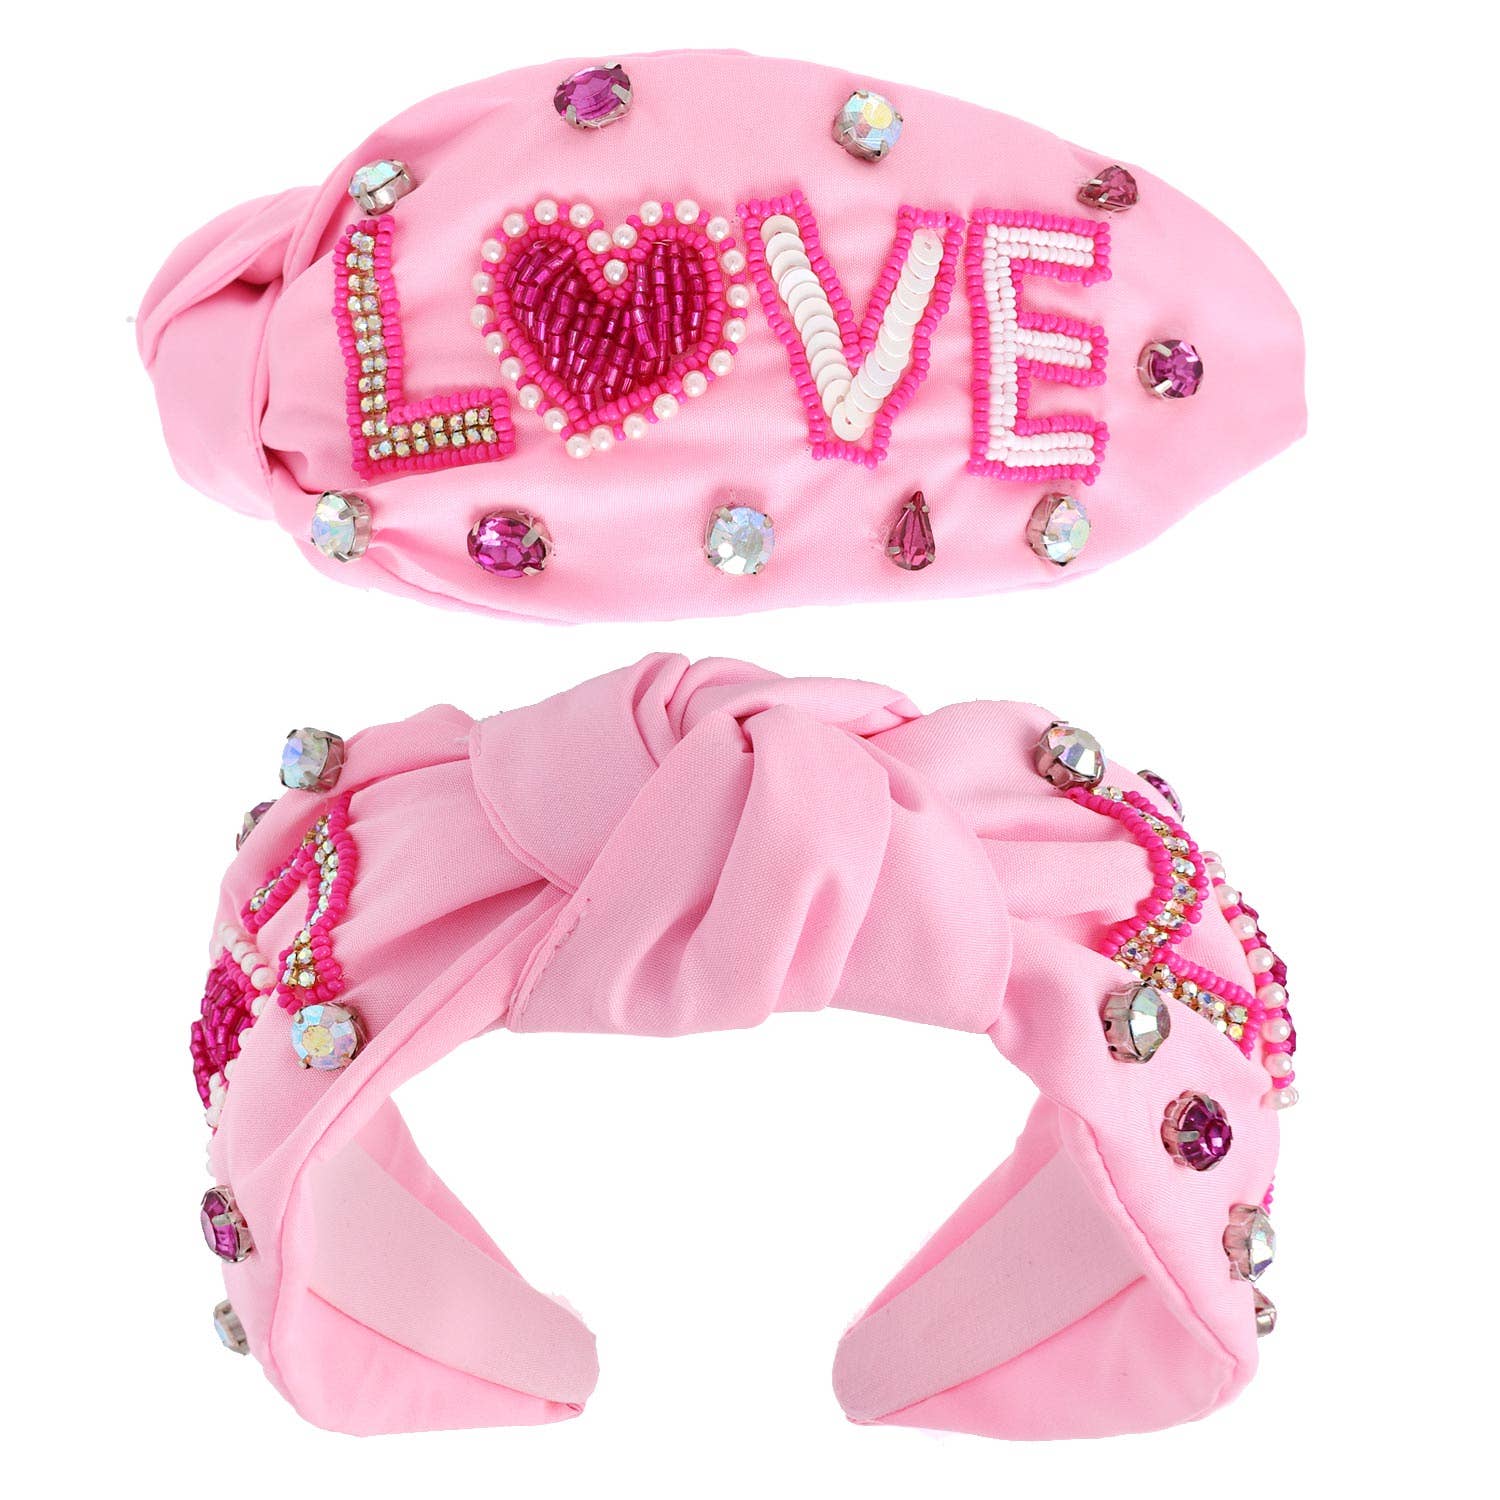 Valentines Day Top Knotted Embellished Headband: Red